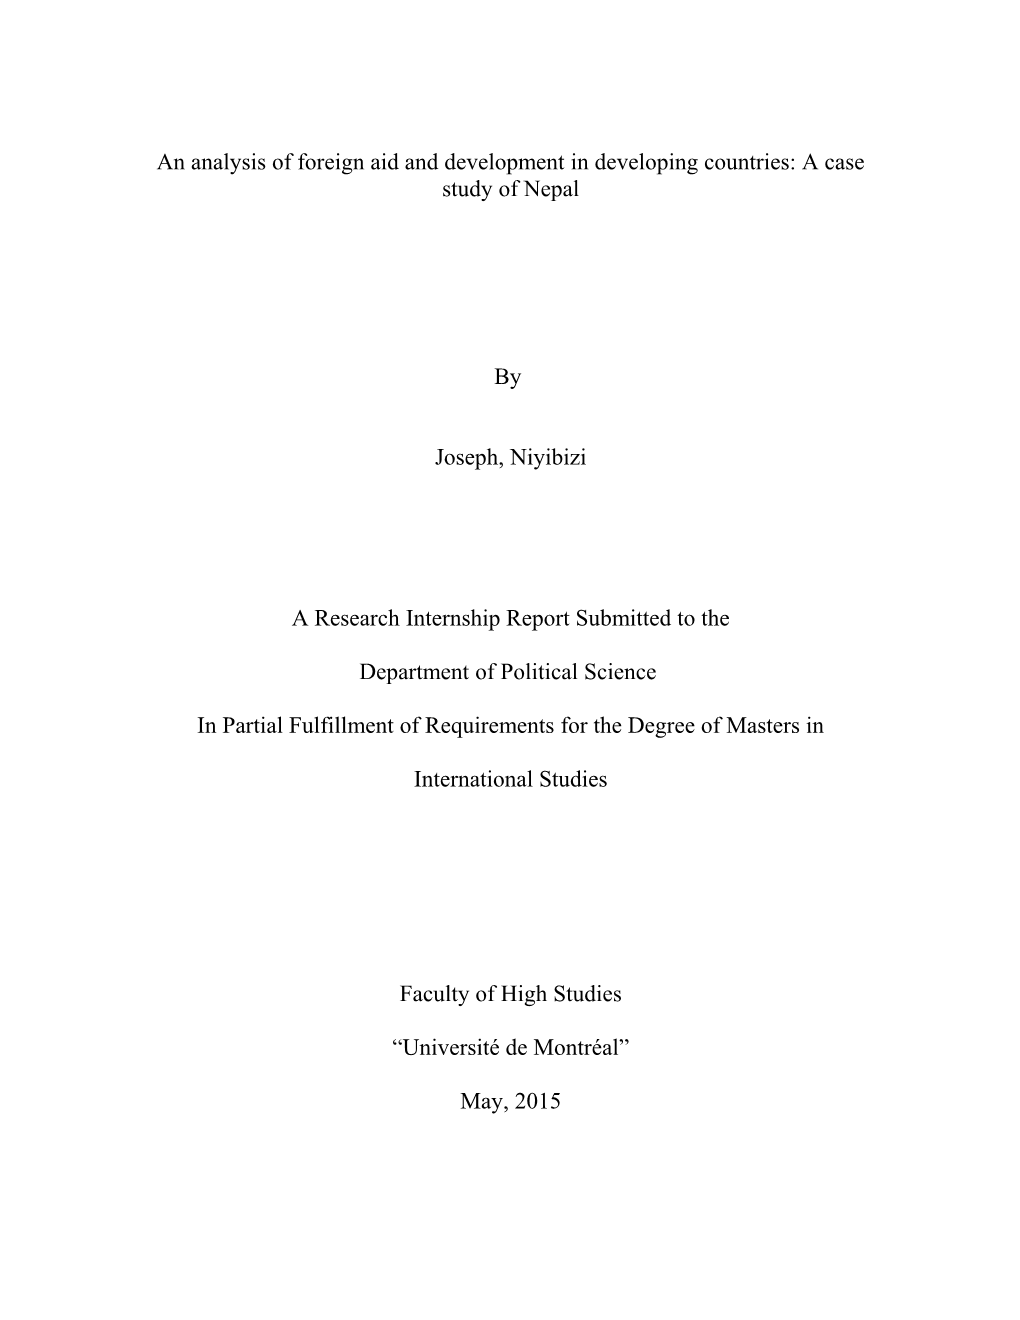 An Analysis of Foreign Aid and Development in Developing Countries: a Case Study of Nepal